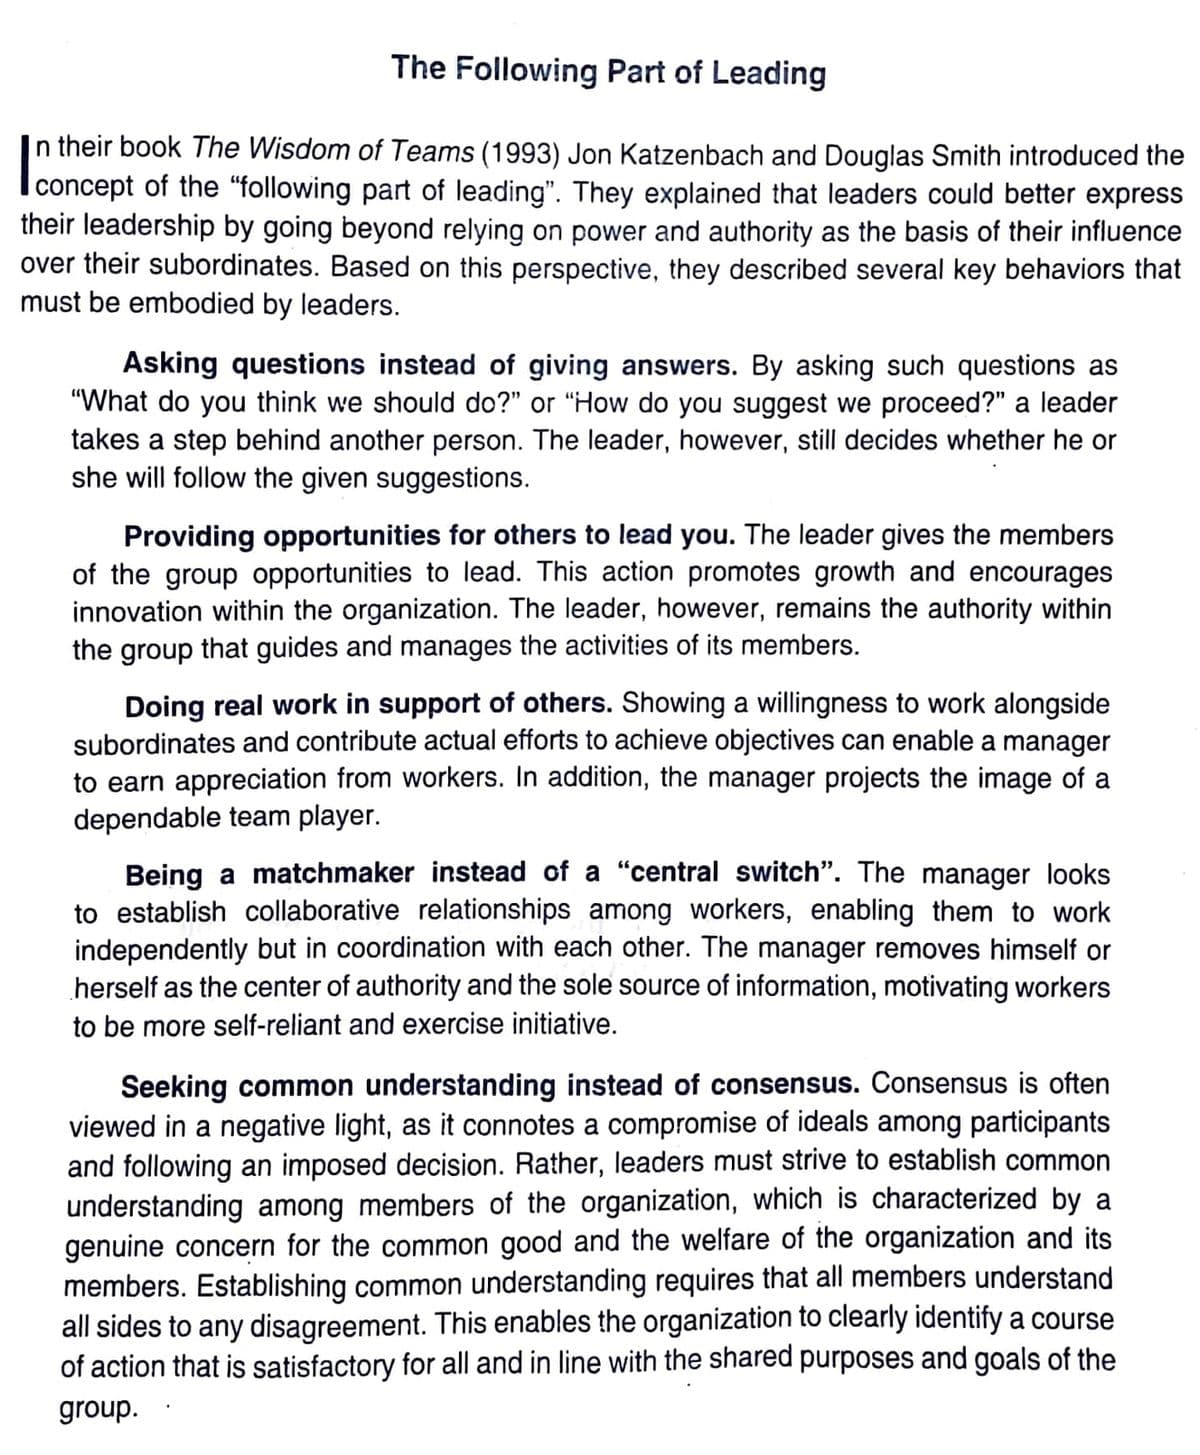 The Following Part of Leading
n their book The Wisdom of Teams (1993) Jon Katzenbach and Douglas Smith introduced the
concept of the "following part of leading". They explained that leaders could better express
their leadership by going beyond relying on power and authority as the basis of their influence
over their subordinates. Based on this perspective, they described several key behaviors that
must be embodied by leaders.
Asking questions instead of giving answers. By asking such questions as
"What do you think we should do?" or "How do you suggest we proceed?" a leader
takes a step behind another person. The leader, however, still decides whether he or
she will follow the given suggestions.
Providing opportunities for others to lead you. The leader gives the members
of the group opportunities to lead. This action promotes growth and encourages
innovation within the organization. The leader, however, remains the authority within
the group that guides and manages the activities of its members.
Doing real work in support of others. Showing a willingness to work alongside
subordinates and contribute actual efforts to achieve objectives can enable a manager
to earn appreciation from workers. In addition, the manager projects the image of a
dependable team player.
Being a matchmaker instead of a "central switch". The manager looks
to establish collaborative relationships among workers, enabling them to work
independently but in coordination with each other. The manager removes himself or
herself as the center of authority and the sole source of information, motivating workers
to be more self-reliant and exercise initiative.
Seeking common understanding instead of consensus. Consensus is often
viewed in a negative light, as it connotes a compromise of ideals among participants
and following an imposed decision. Rather, leaders must strive to establish common
understanding among members of the organization, which is characterized by a
genuine concern for the common good and the welfare of the organization and its
members. Establishing common understanding requires that all members understand
all sides to any disagreement. This enables the organization to clearly identify a course
of action that is satisfactory for all and in line with the shared purposes and goals of the
group.